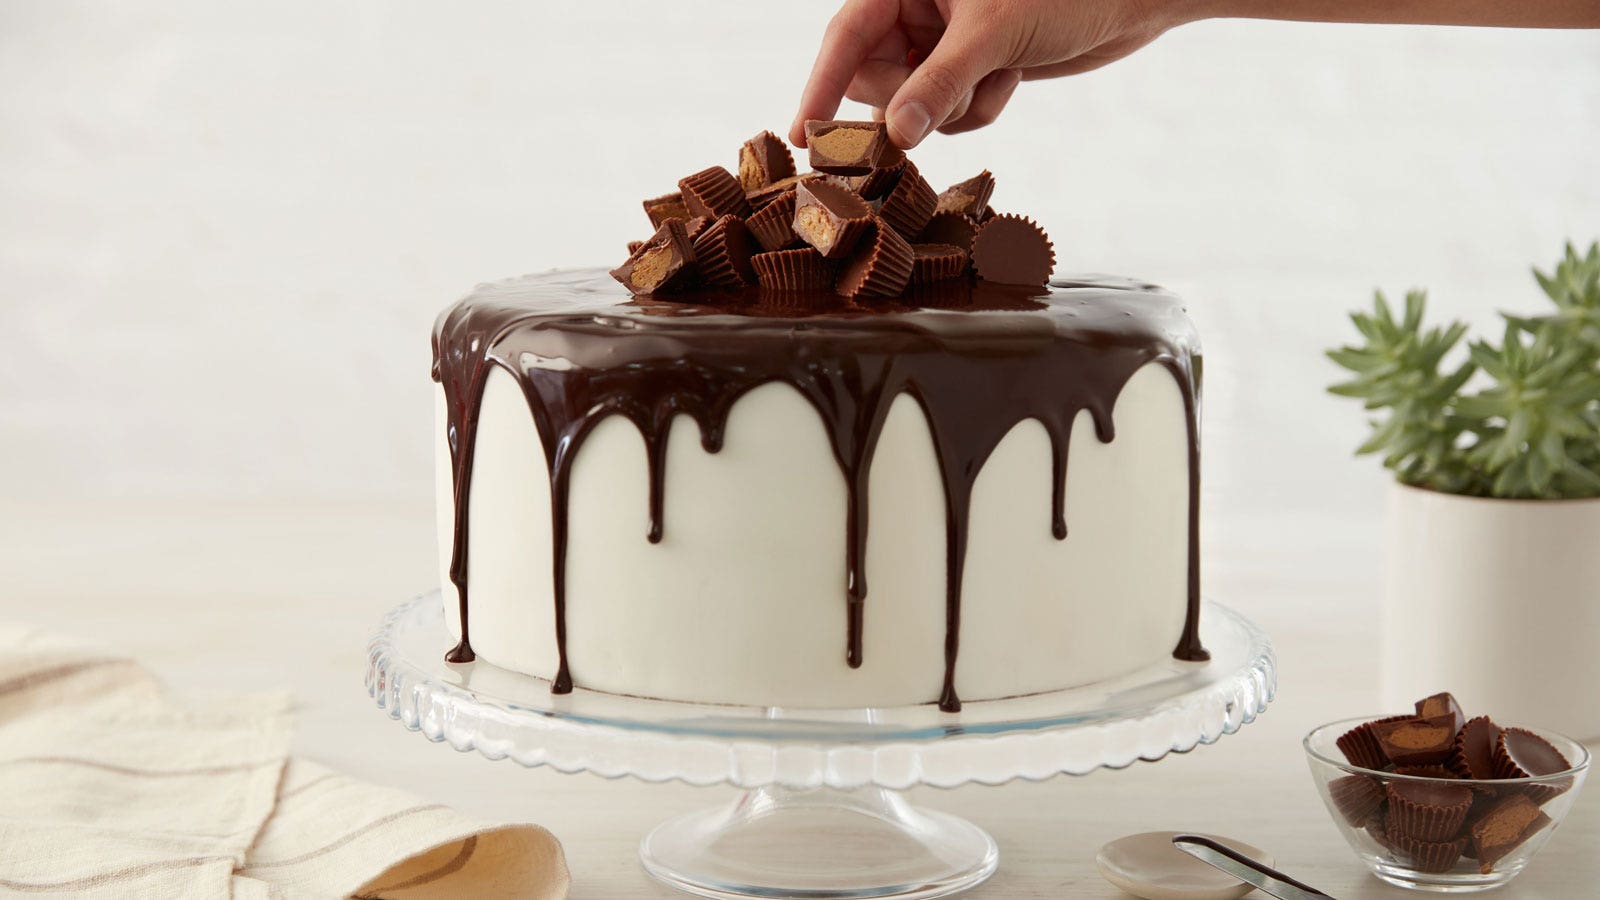 Hershey's Chocolate Cake With Frosting Recipe - Food.com